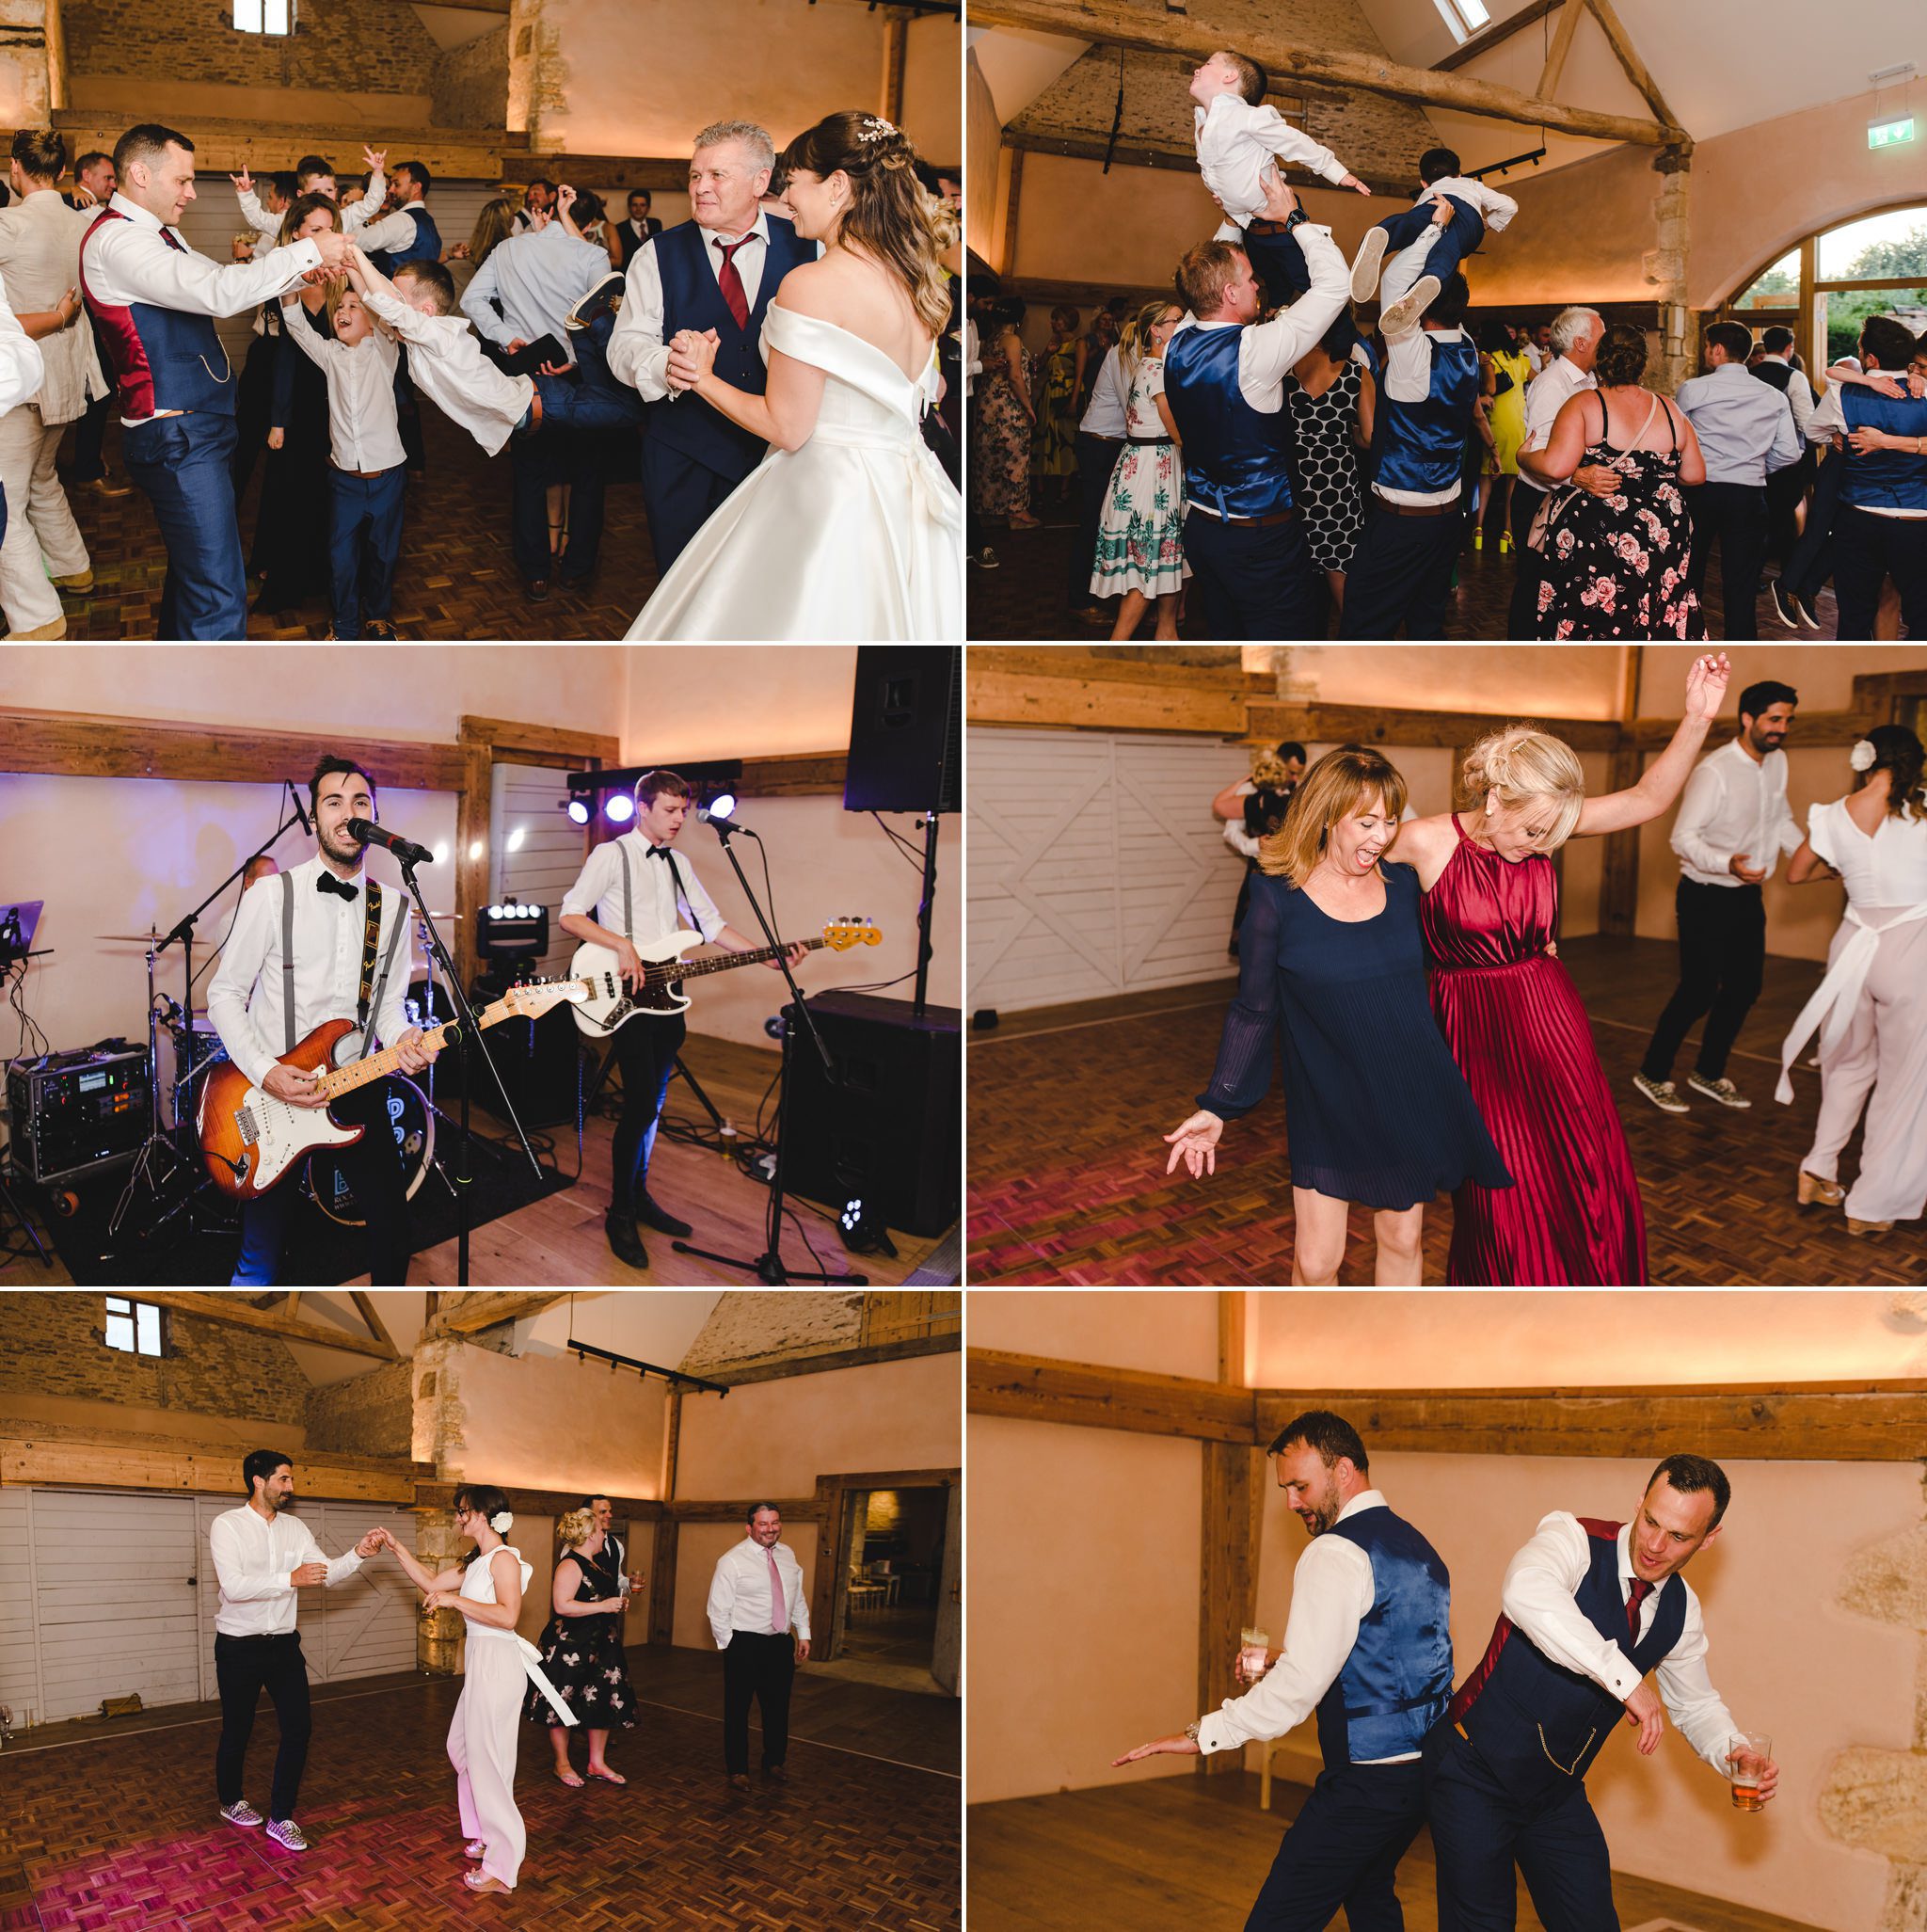 Wedding guests dancing at Oxleaze Barn